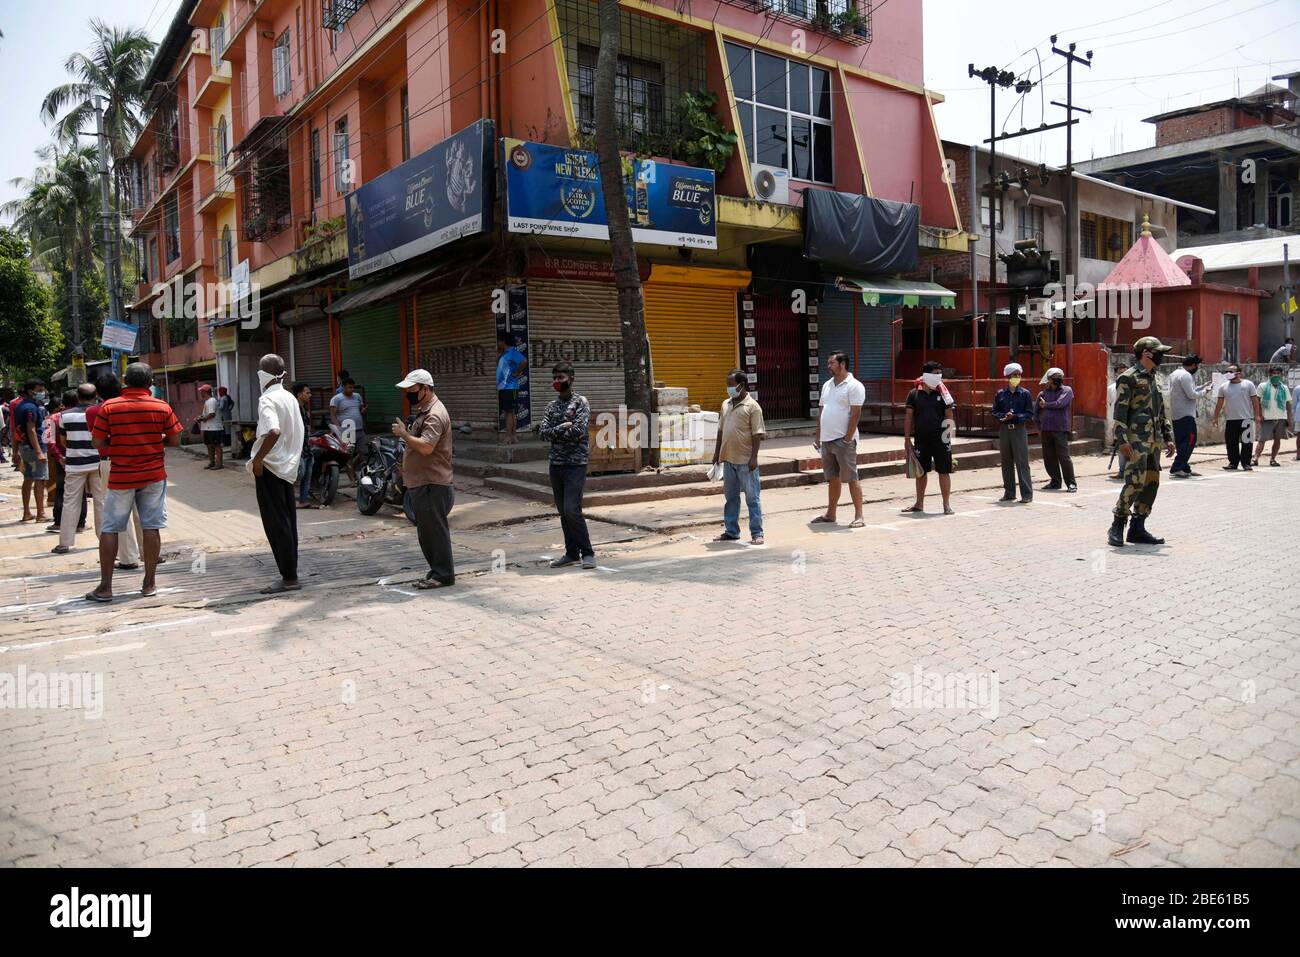 Guwahati, Assam, India. 10 April 2020. People are in que to buy chicken, during the nationwide lockdown to curb the spread of coronavirus, in Guwahati, Assam, India on Sunday, April 12, 2020. Credit: David Talukdar/Alamy Live News Stock Photo